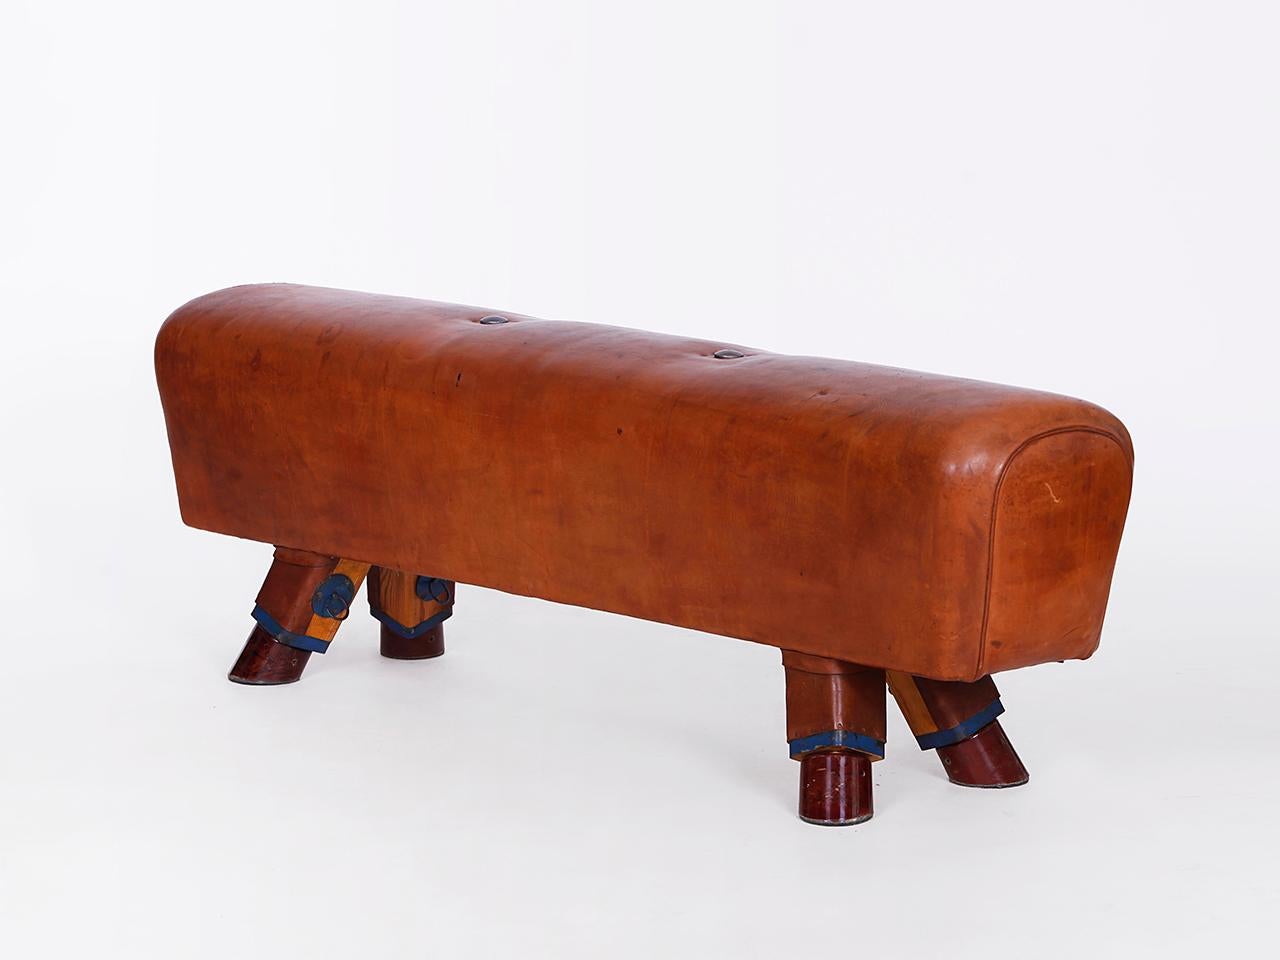 Pommel horse from former Czechoslovakia from the 1930s with beautiful patina, shortened to bench height 52cm and very good vintage condition. Completely restored. The iron feet are preserved. The thick leather has been cleaned and preserved. All of